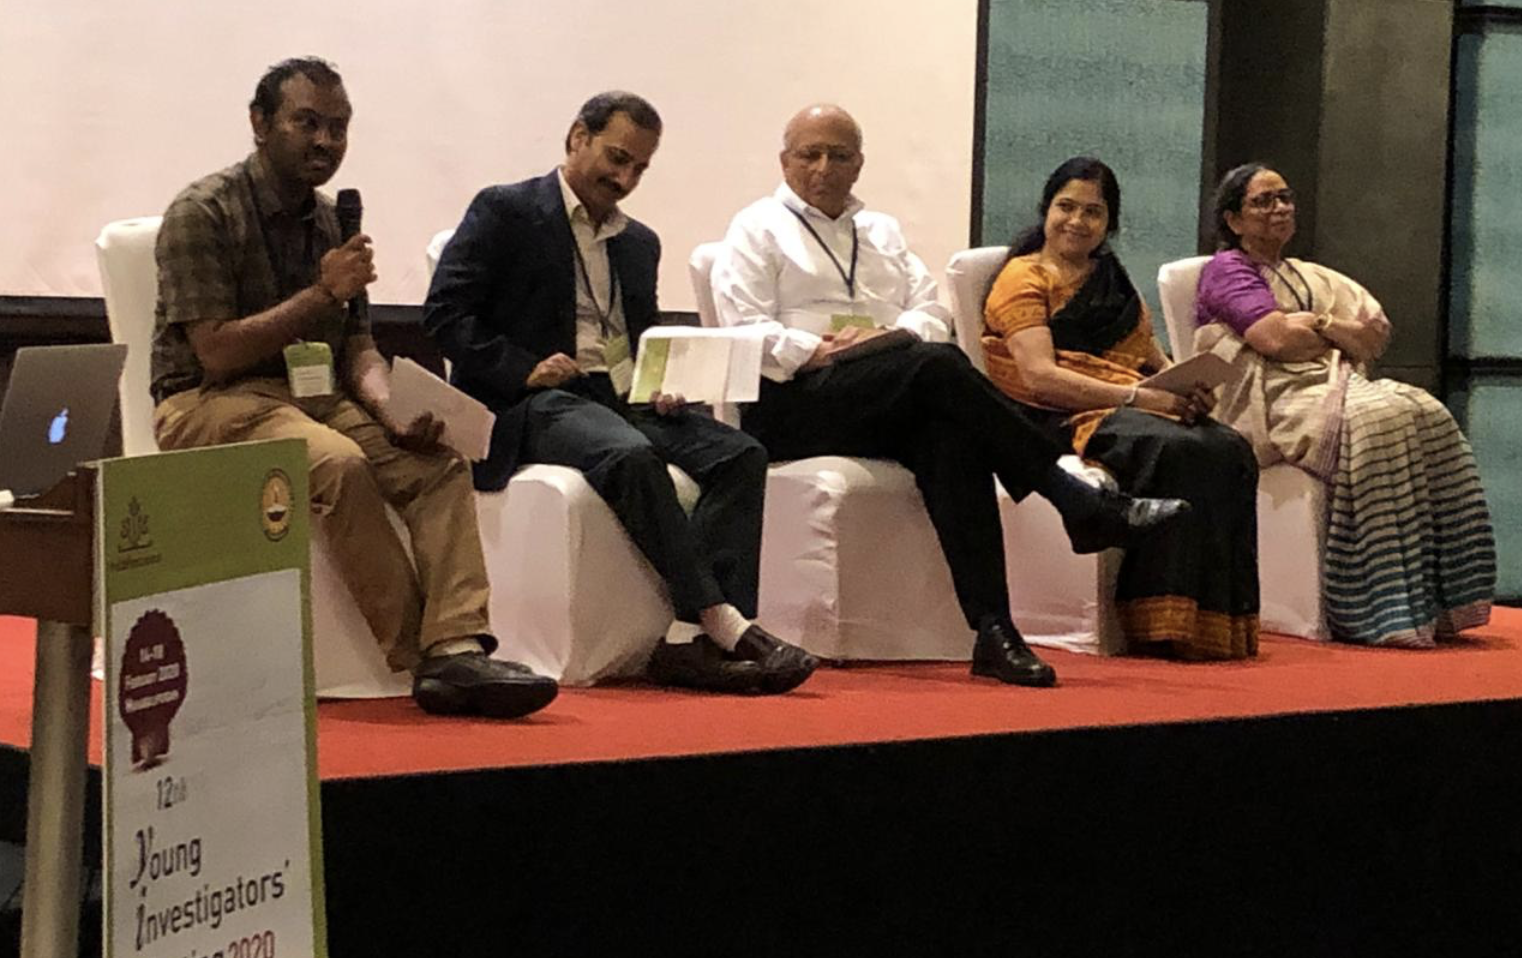 Aravindhan (left) speaks on a panel with representatives of funding agencies such as (left to right) Balachander from SERB, Shahid Jameel from India Alliance and Meenakshi Munshi from DBT, at YIM 2020 Credit: V. Aravindhan